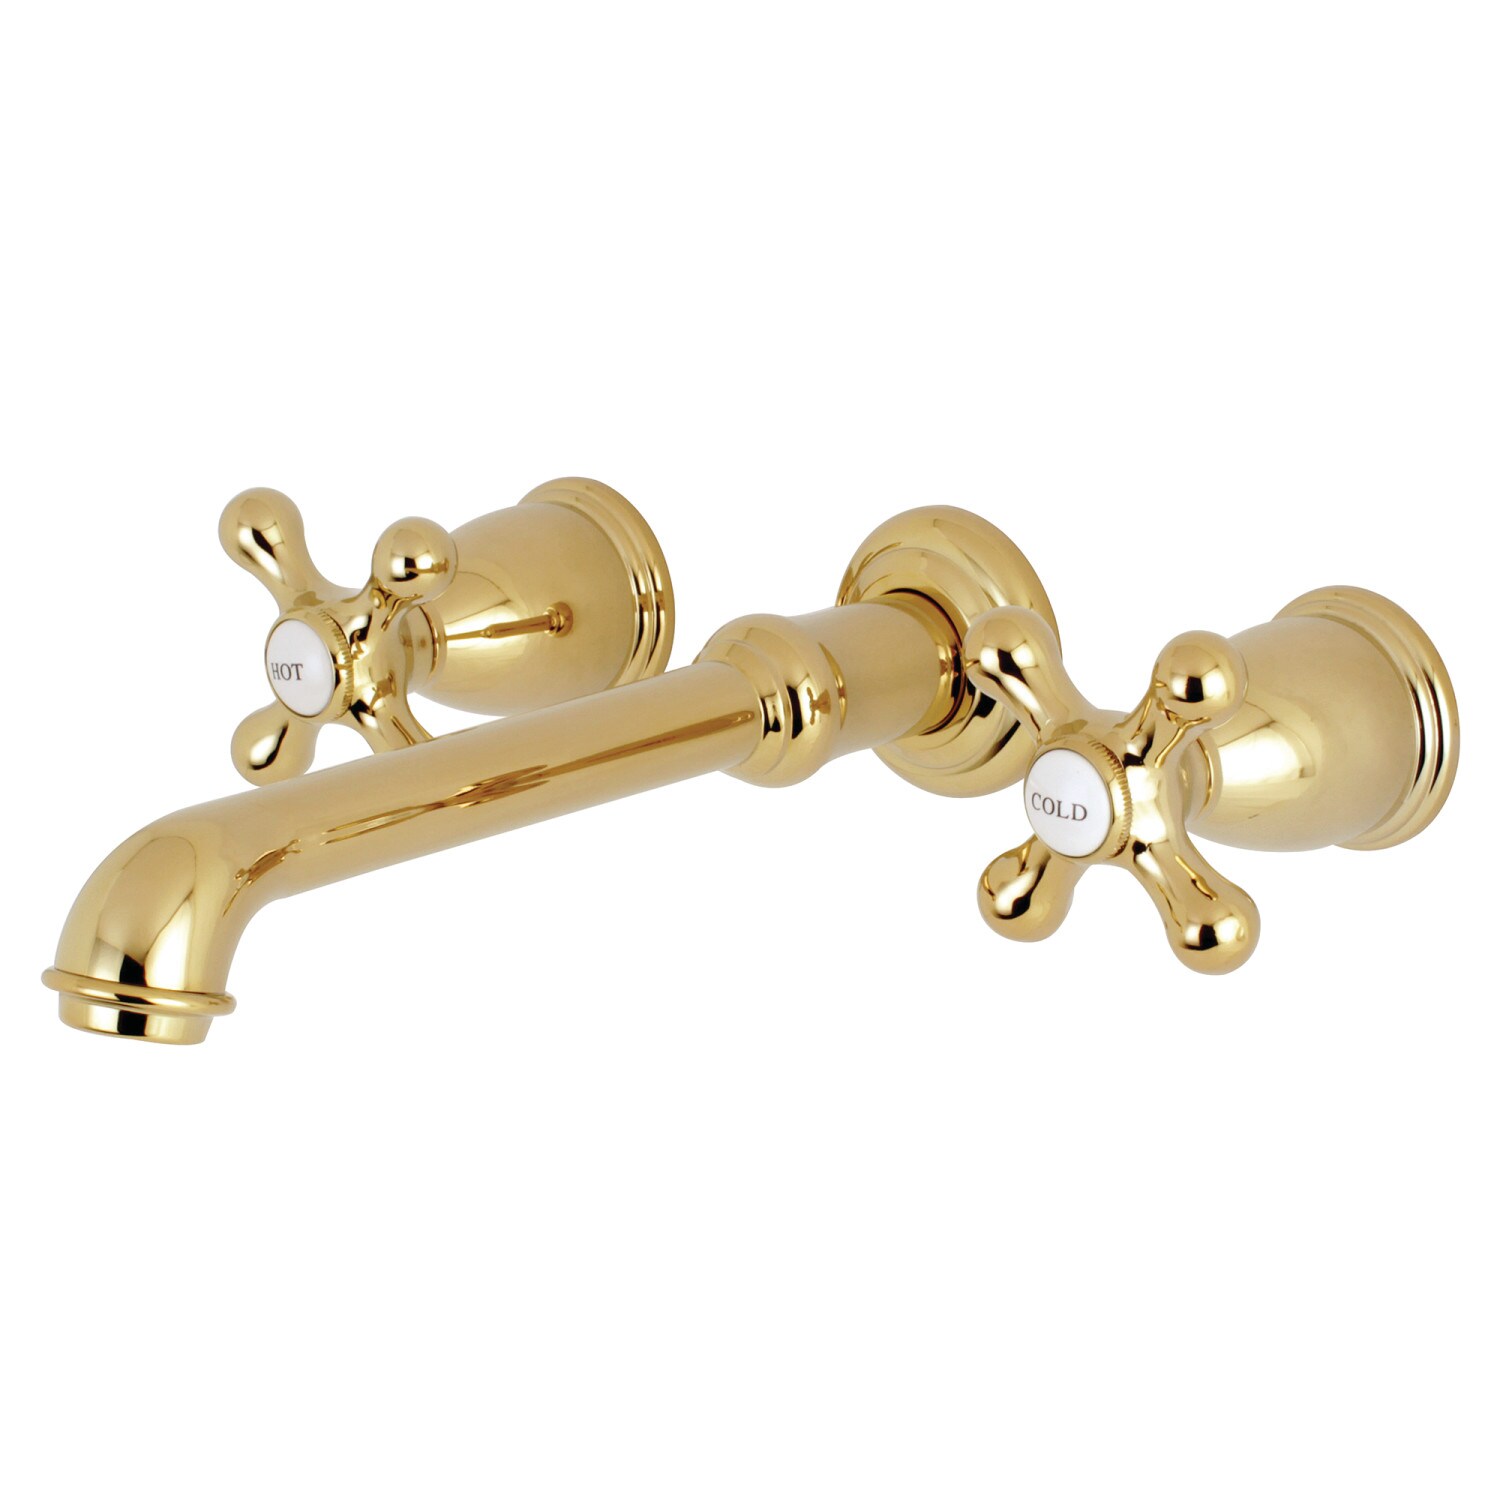 FLG Single-Handle Wall Mount Bidet Faucet with Handle Brass